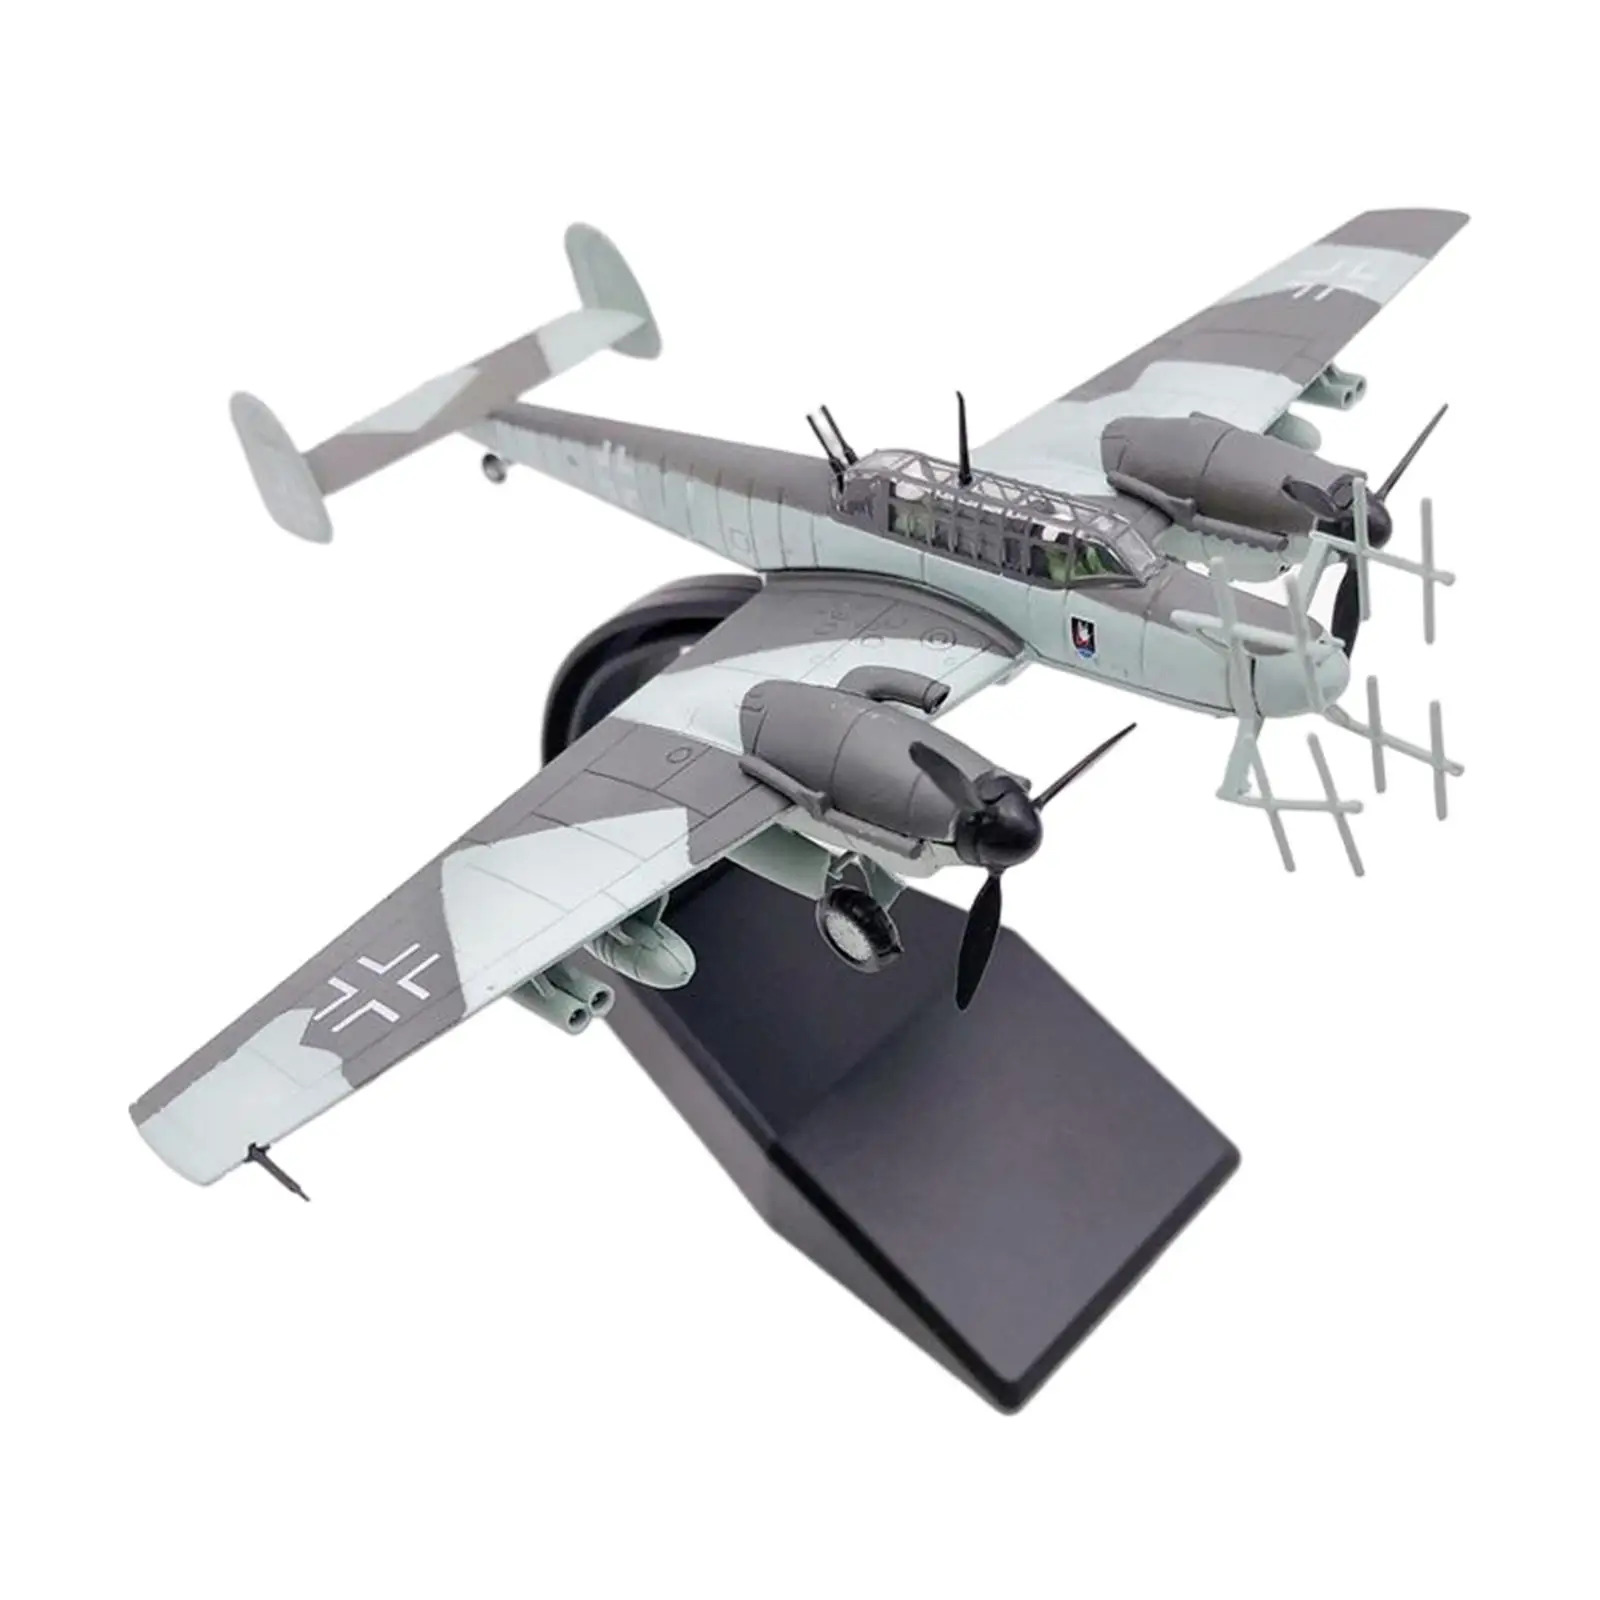 1:100 BF-110 Fighter Model Toy with Stand Shelf Decorations Birthday Gifts